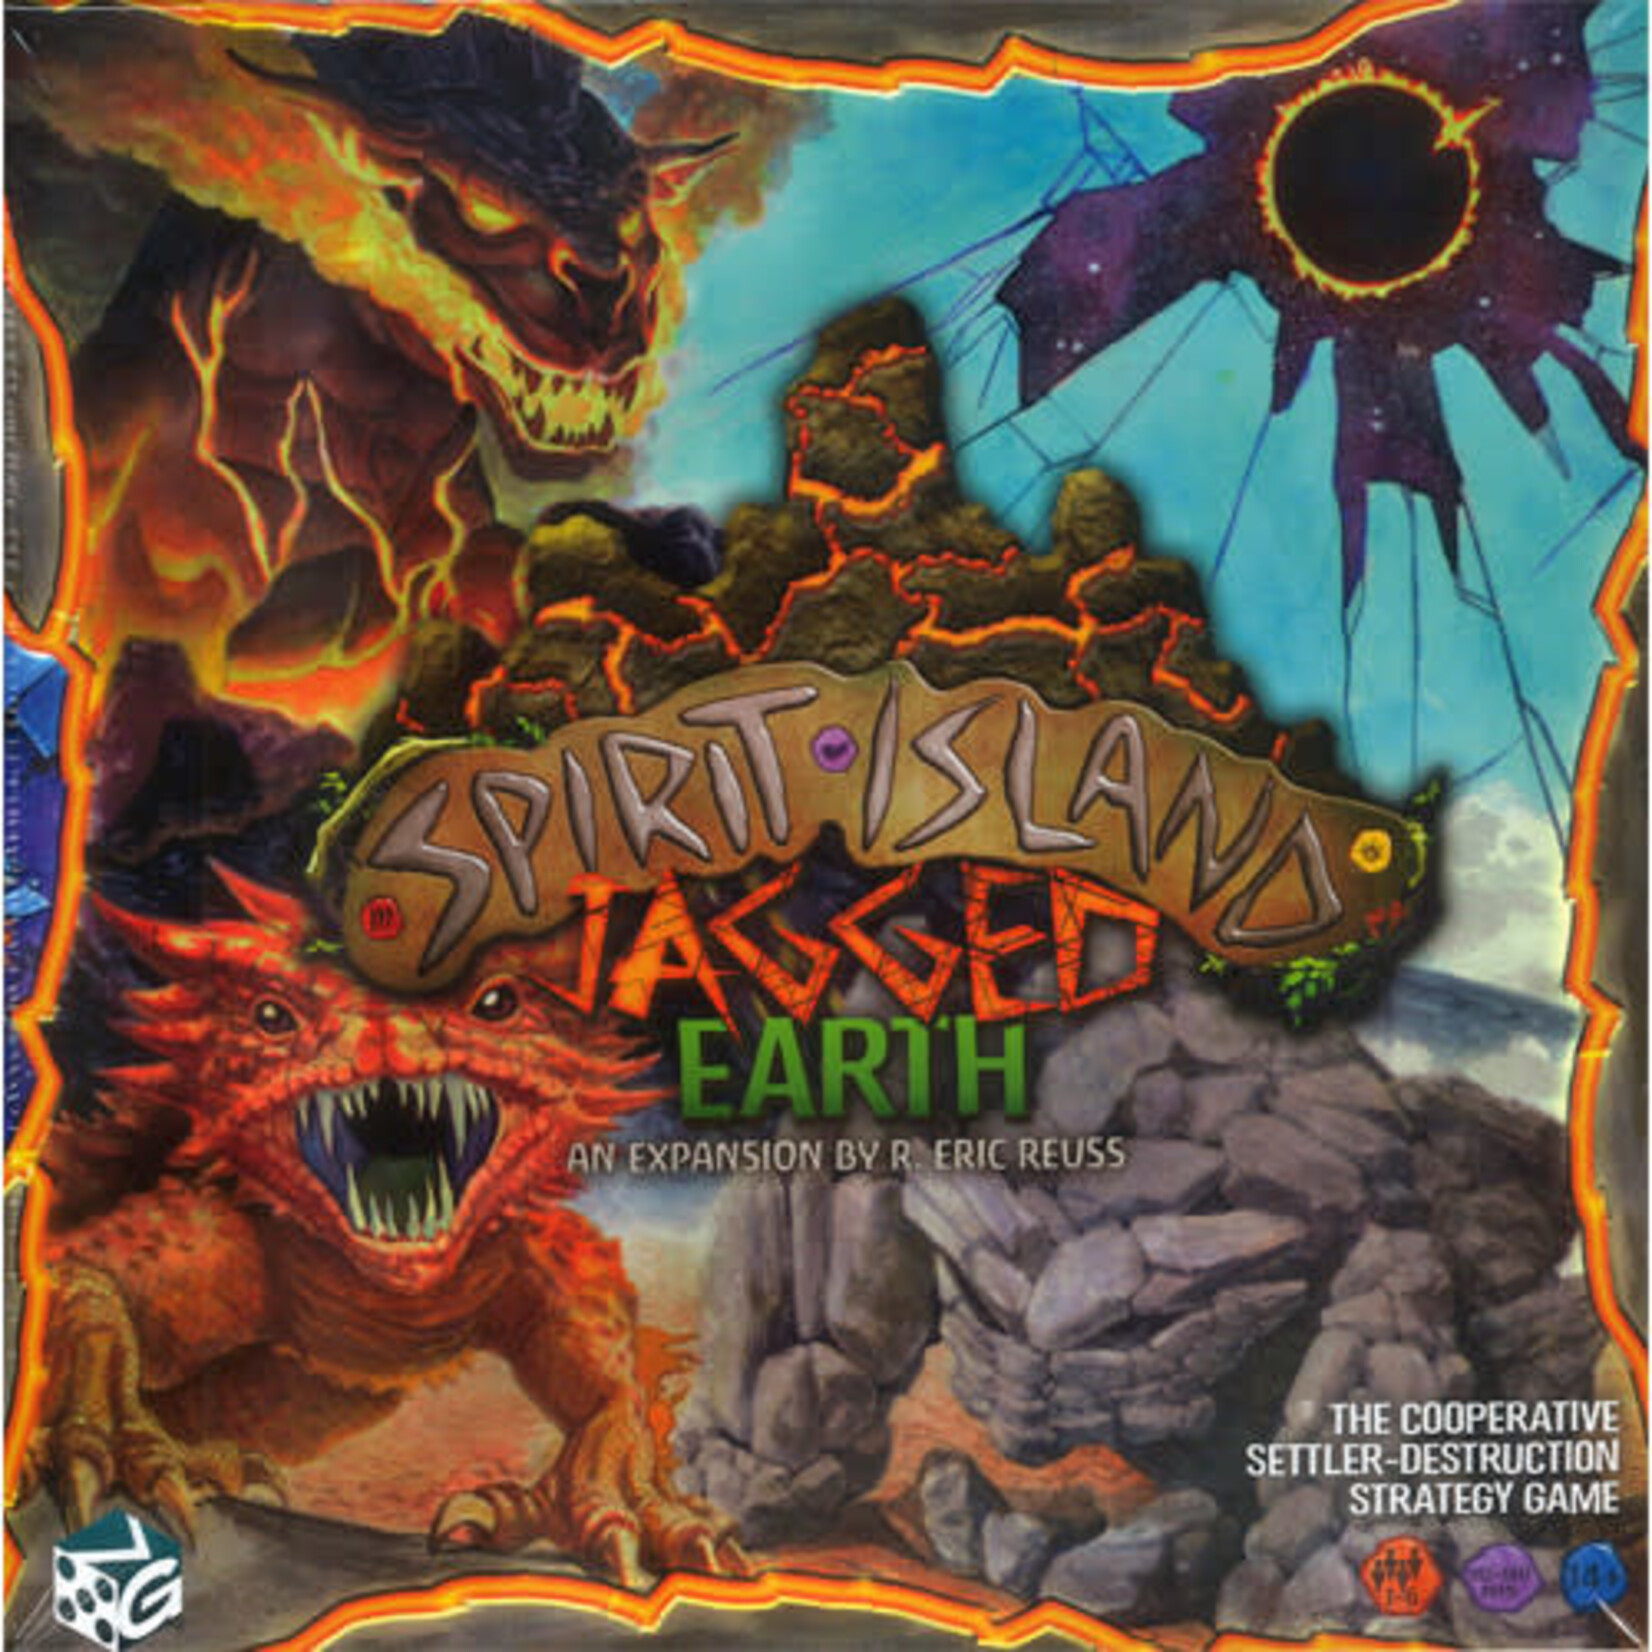 Greater/Than/Games Spirit Island: Jagged Earth Expansion